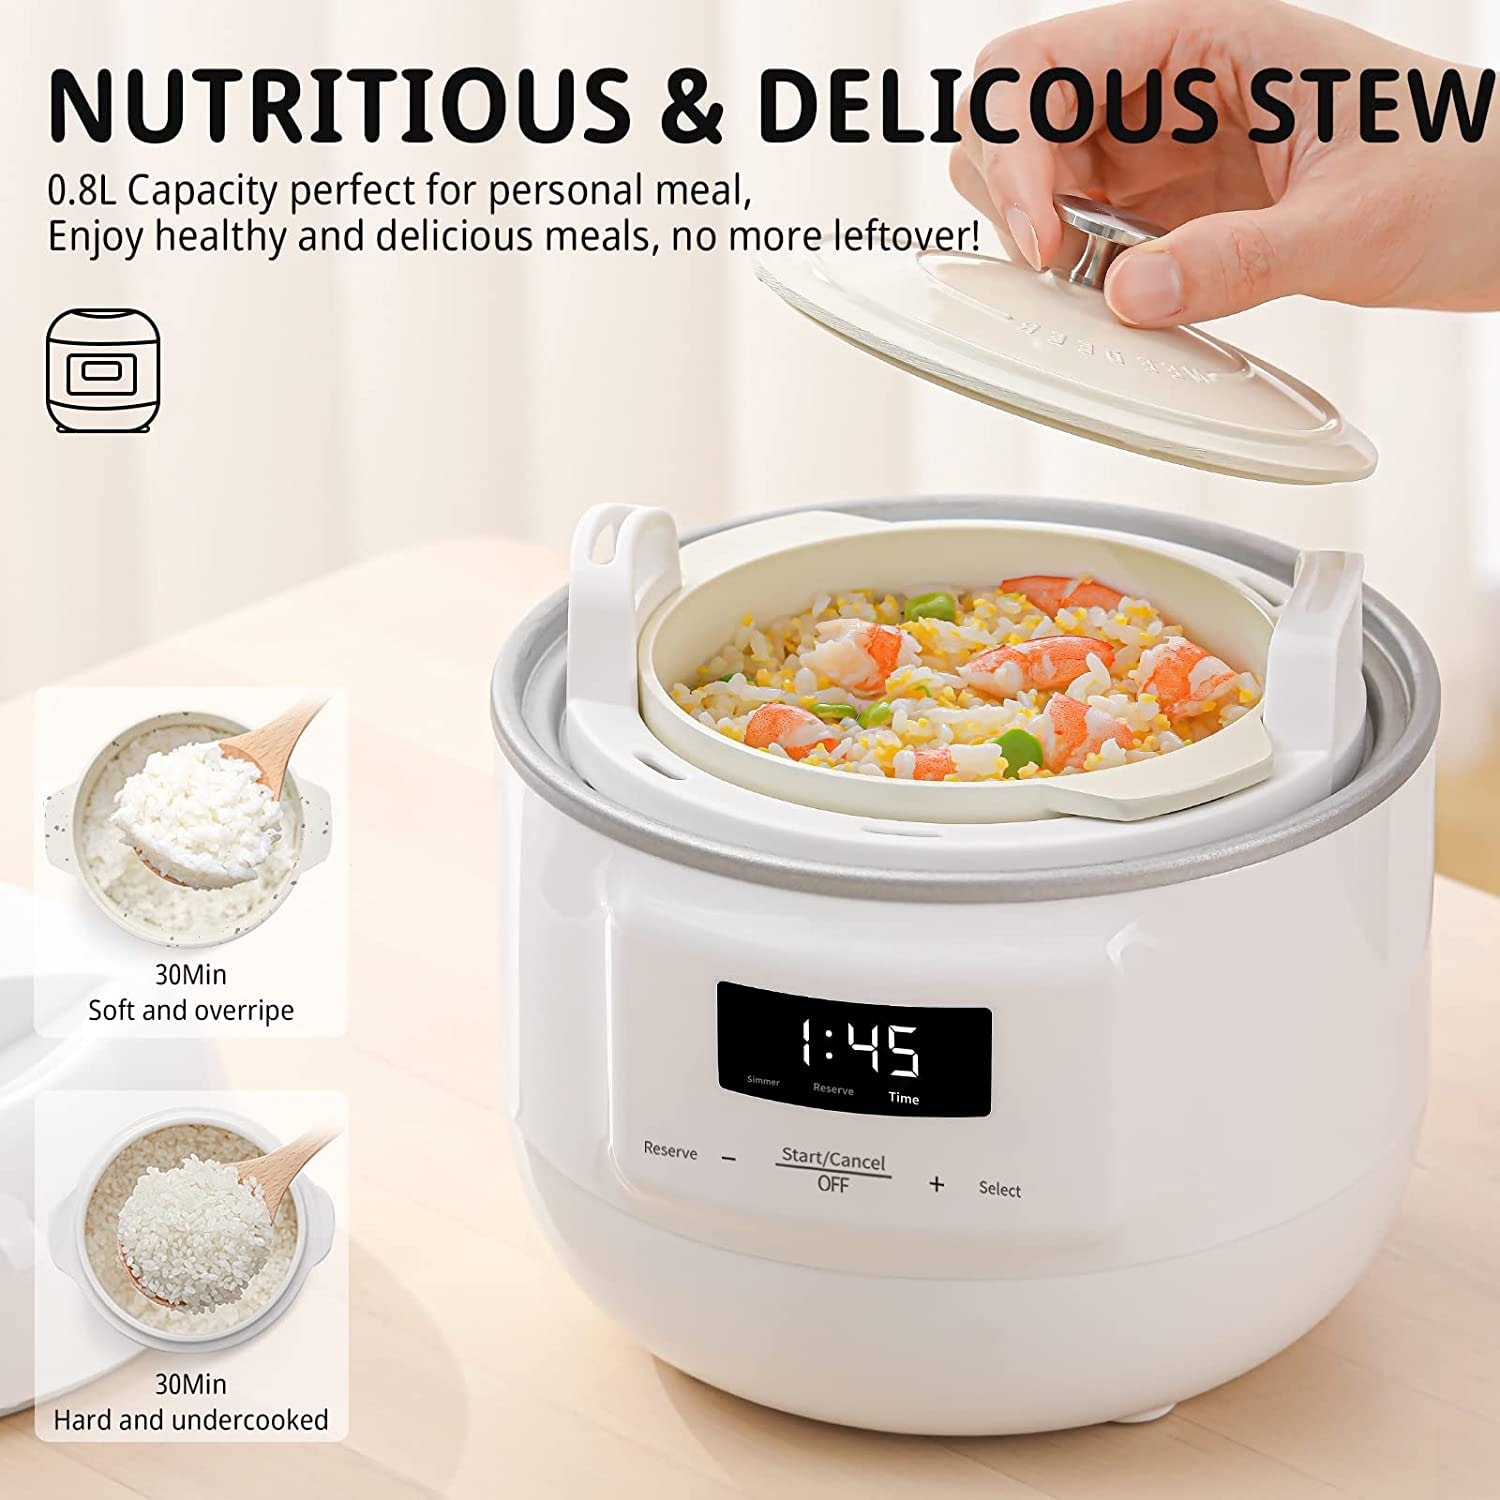 https://ak1.ostkcdn.com/images/products/is/images/direct/6dda4a3e75fa1345074f6d6fb2229ba33e7cf6c9/Slow-Cooker-White%2C-Small-Slow-cooker-1QT%2C-Smart-Appointment%2C-Ceramic-Interior-pot%2C-Automatic-Multi-function-Rice-Cooker.jpg